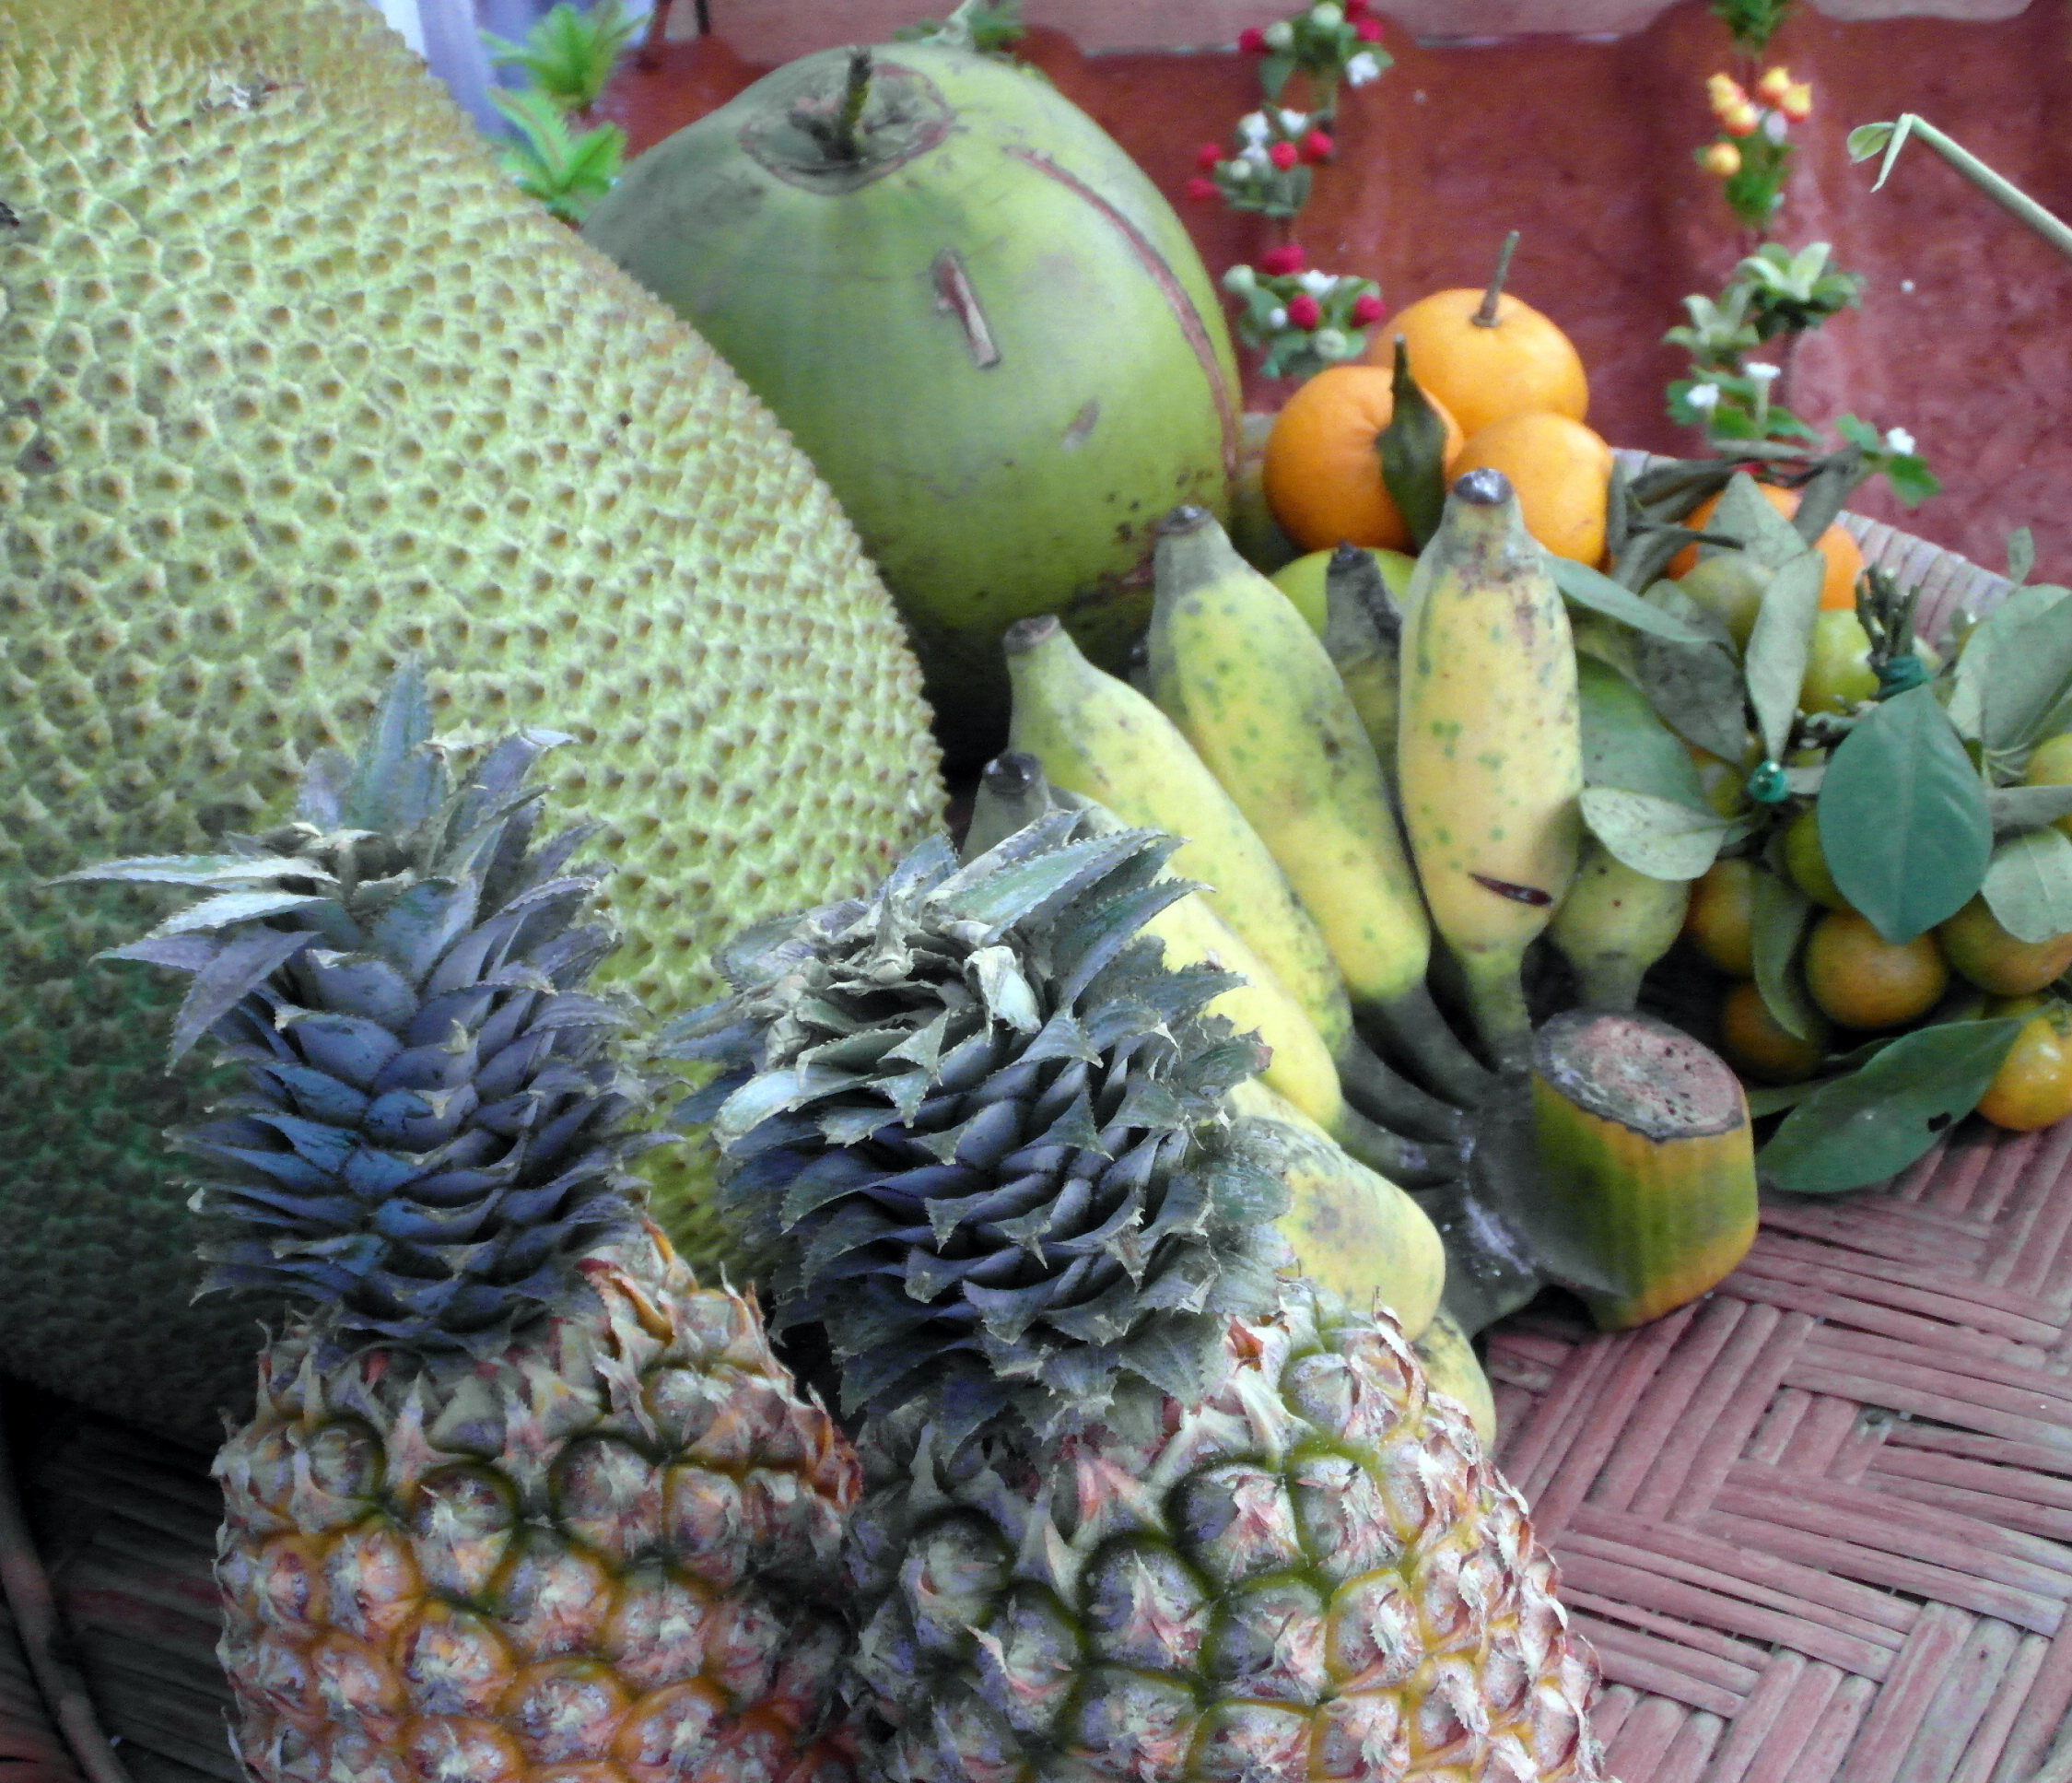 Tropical fruits and vegetables photo